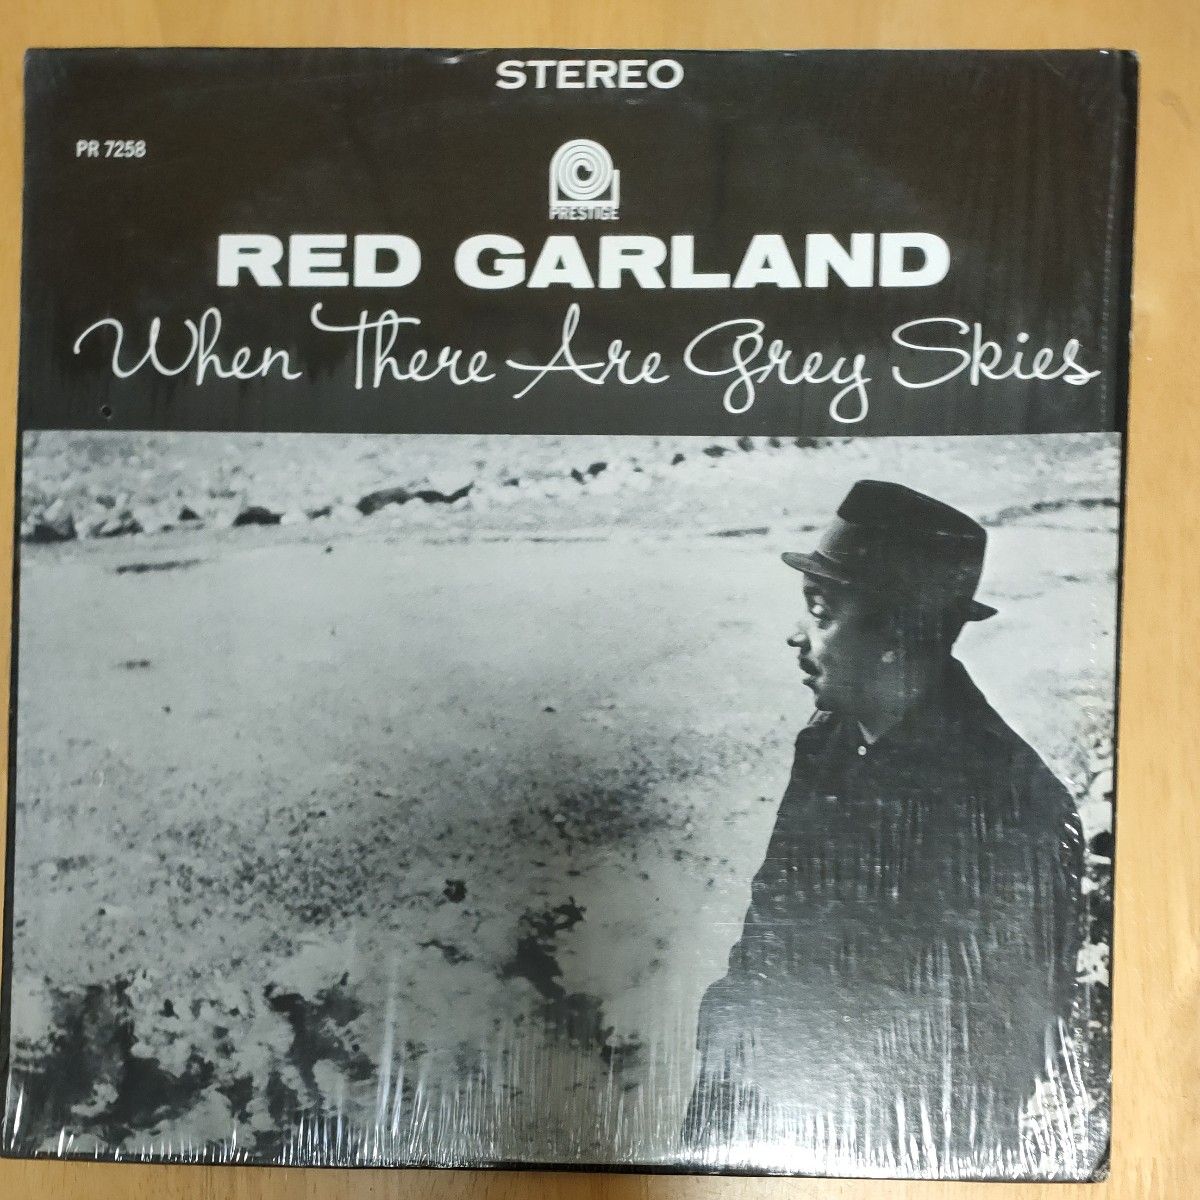 US盤PRESTIGE： When There Are GreySkies/RED GARLAND